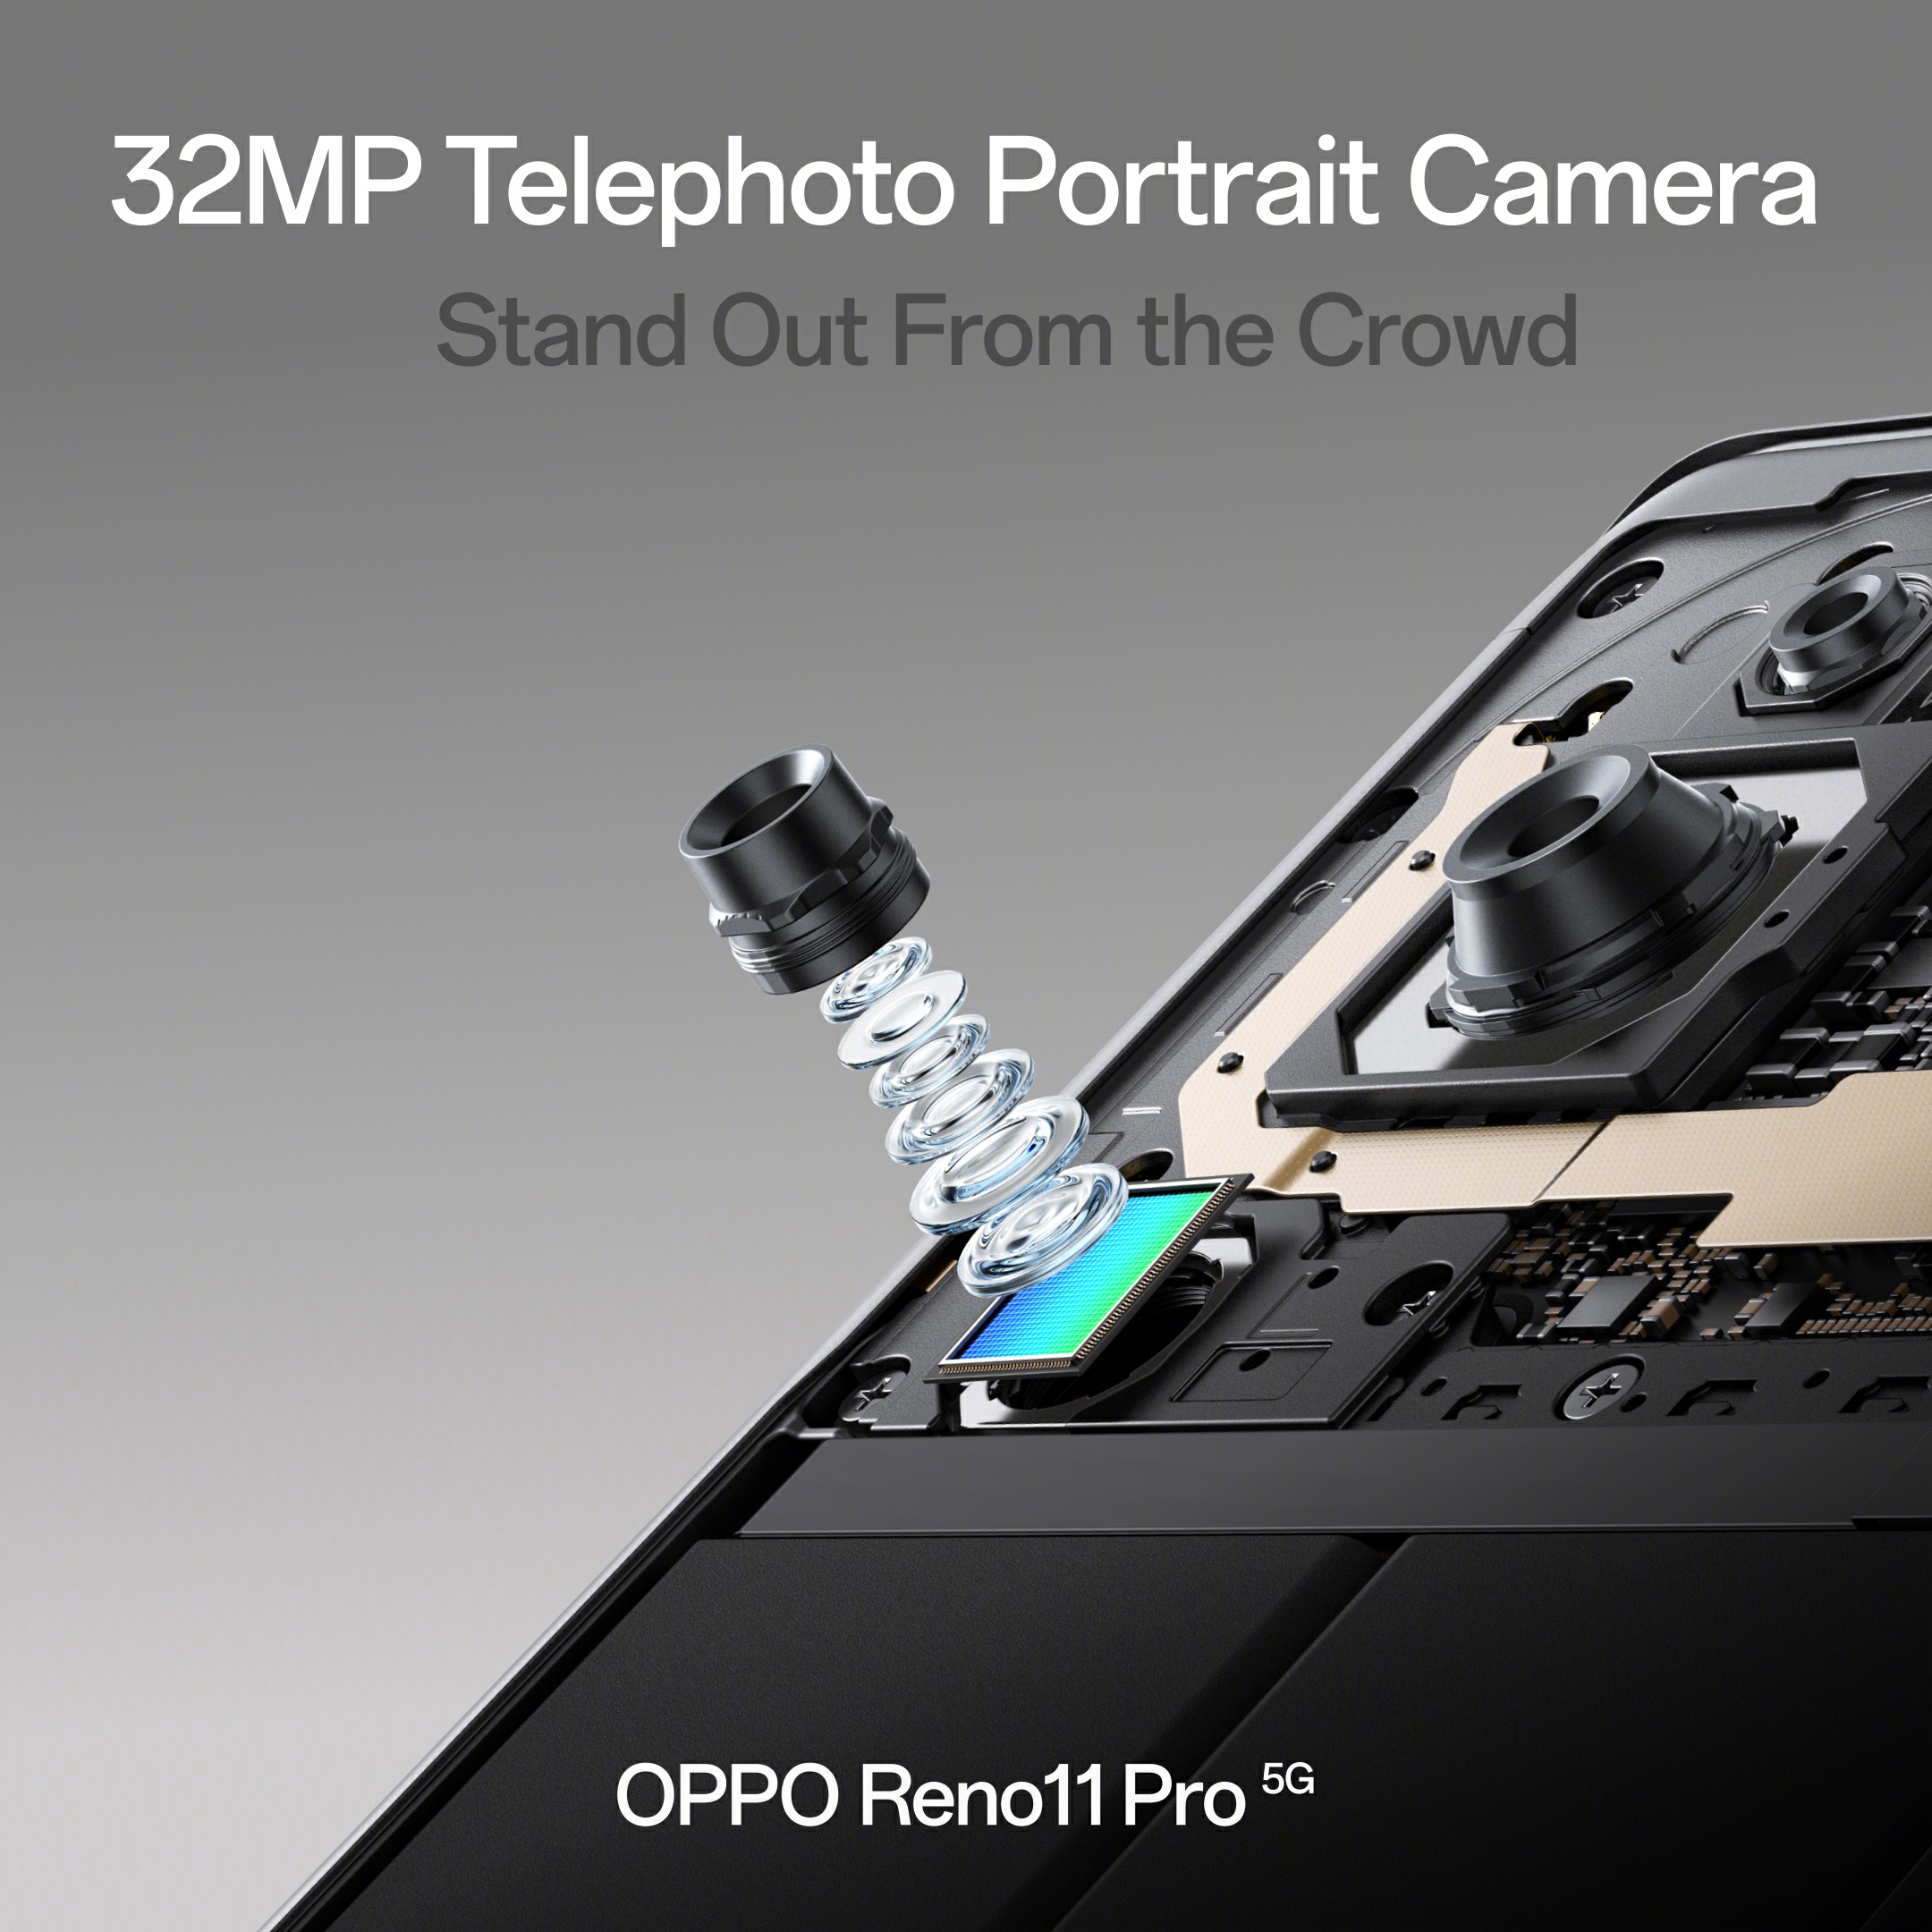 OPPO’s Telephoto Portrait Cameras Offer More Than Zoom